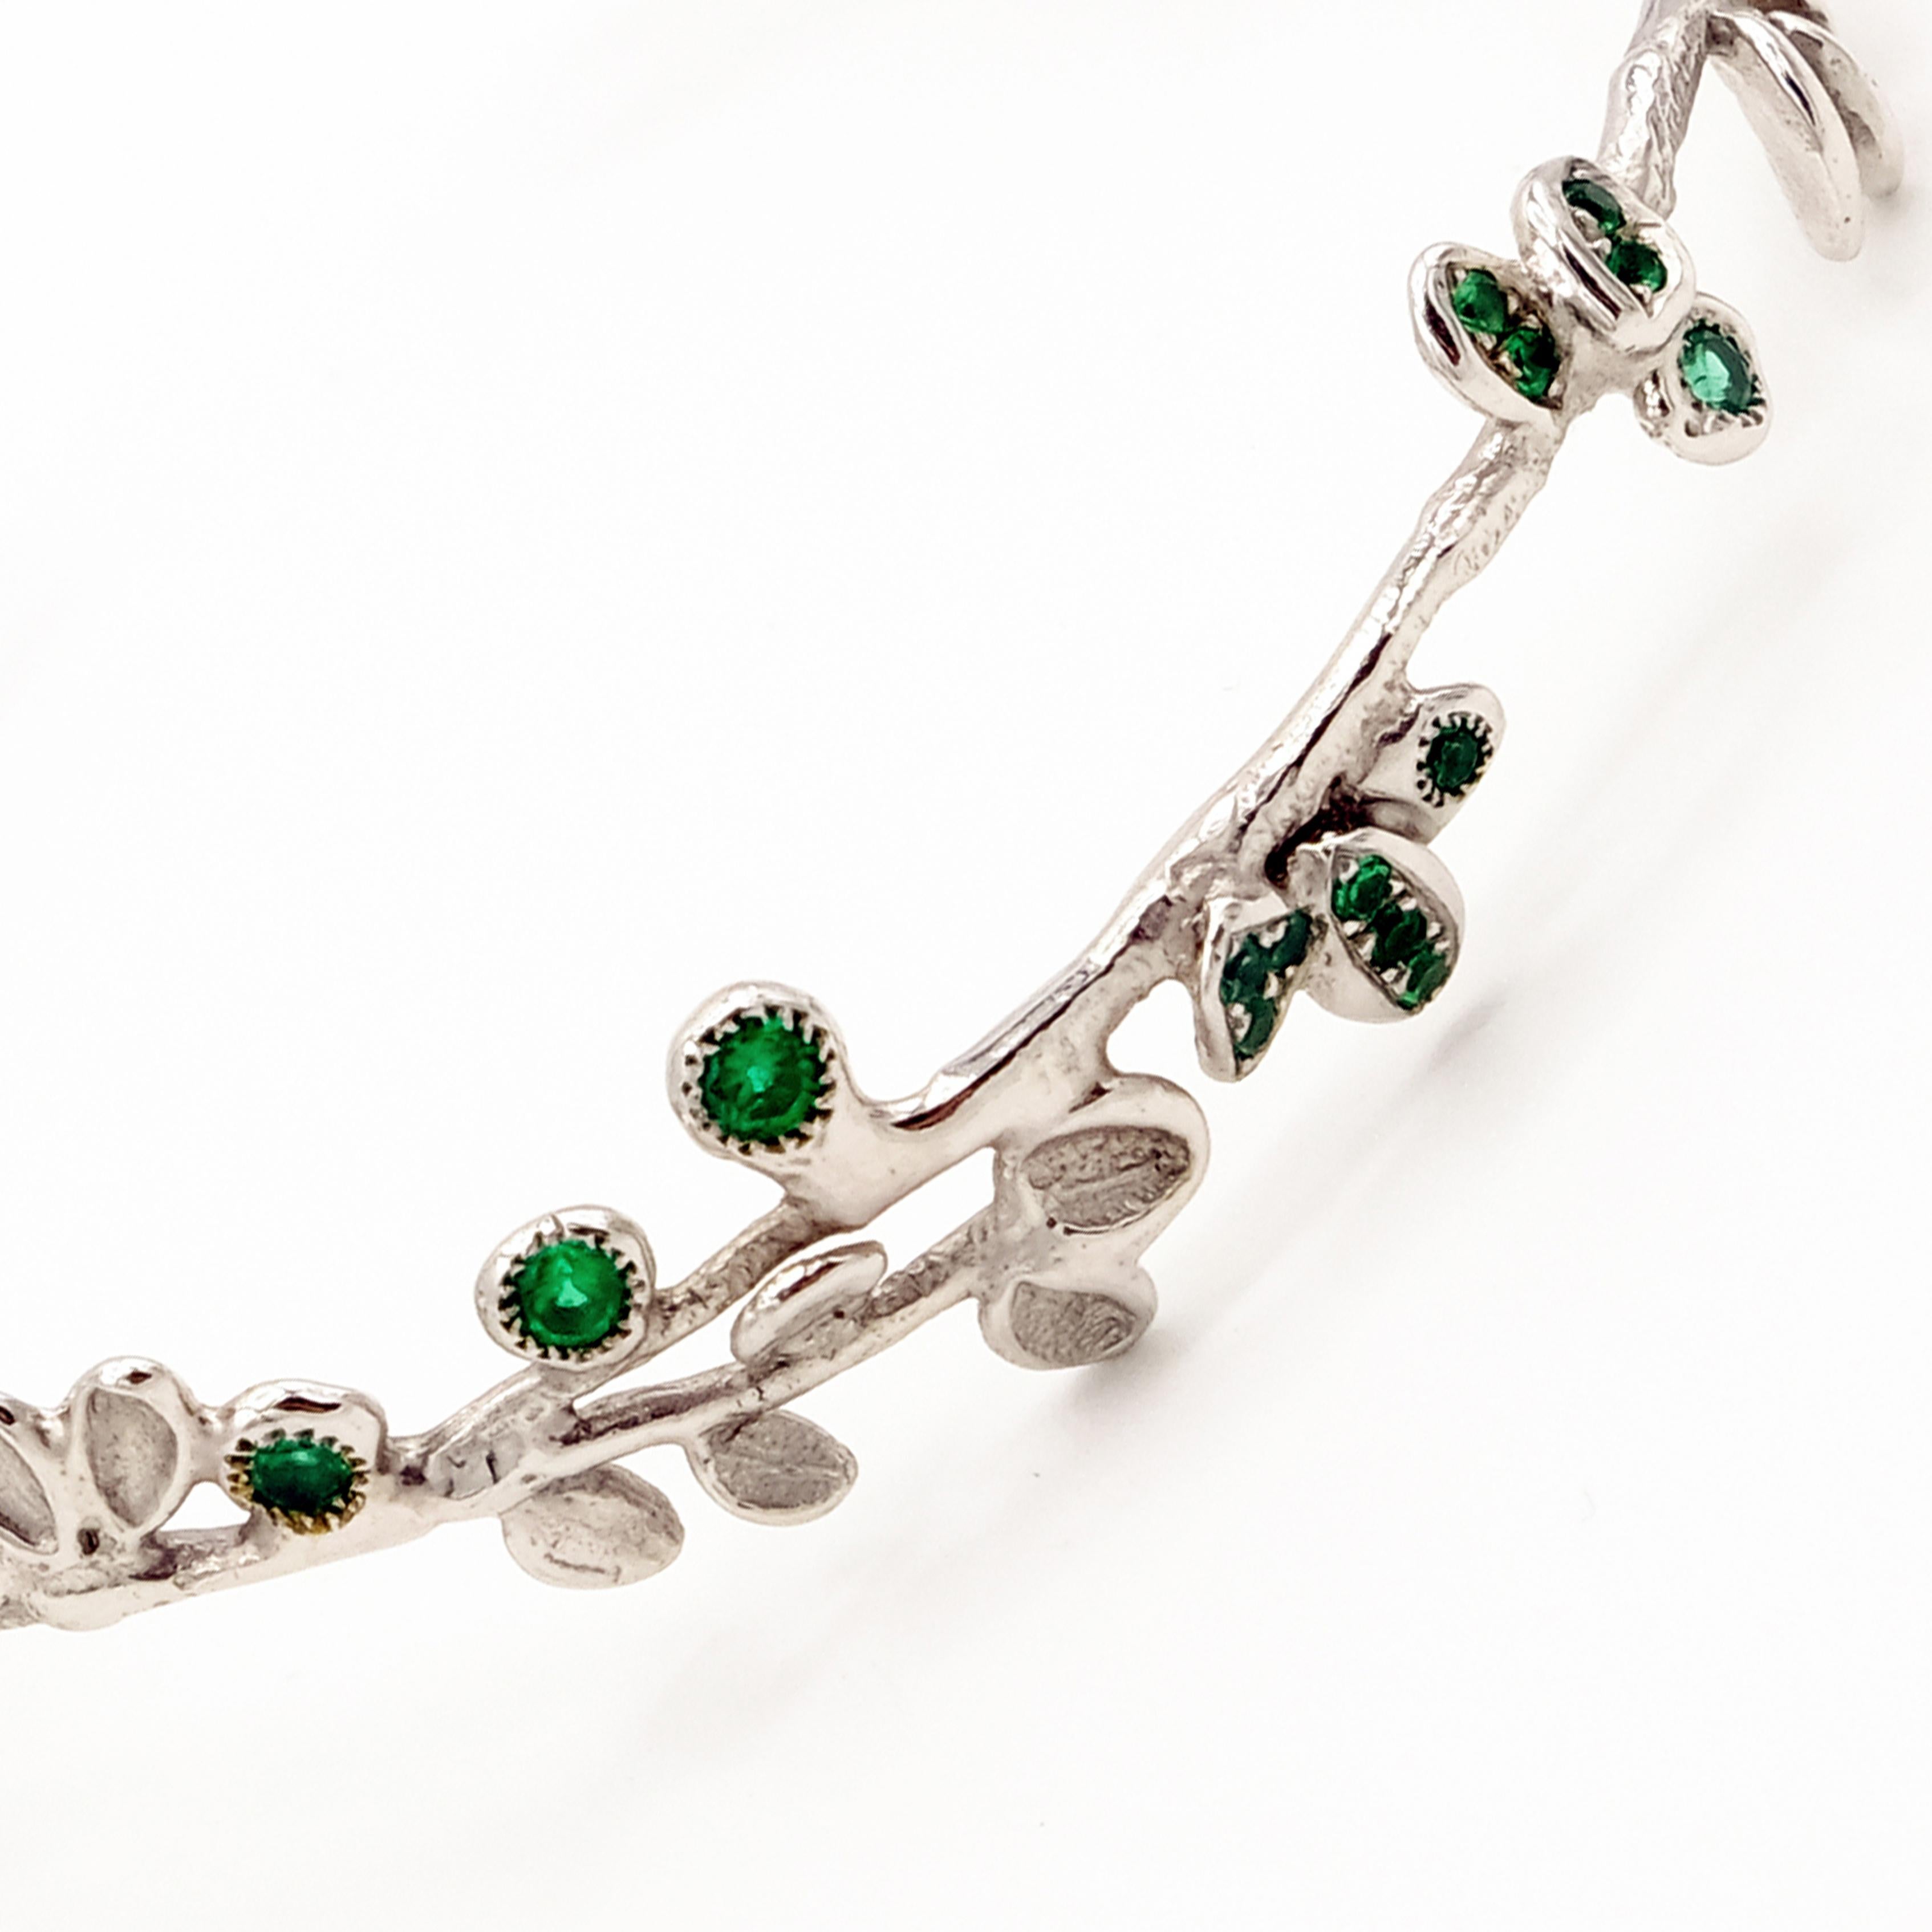 This one-of-a-kind bracelet is expertly crafted by hand from 18 Karat White Gold and weighs approximately 10 grams. It is set with Emeralds in total approximately 0.59 carat.

The craftsmanship is entirely hand made with great care, in my Parisian